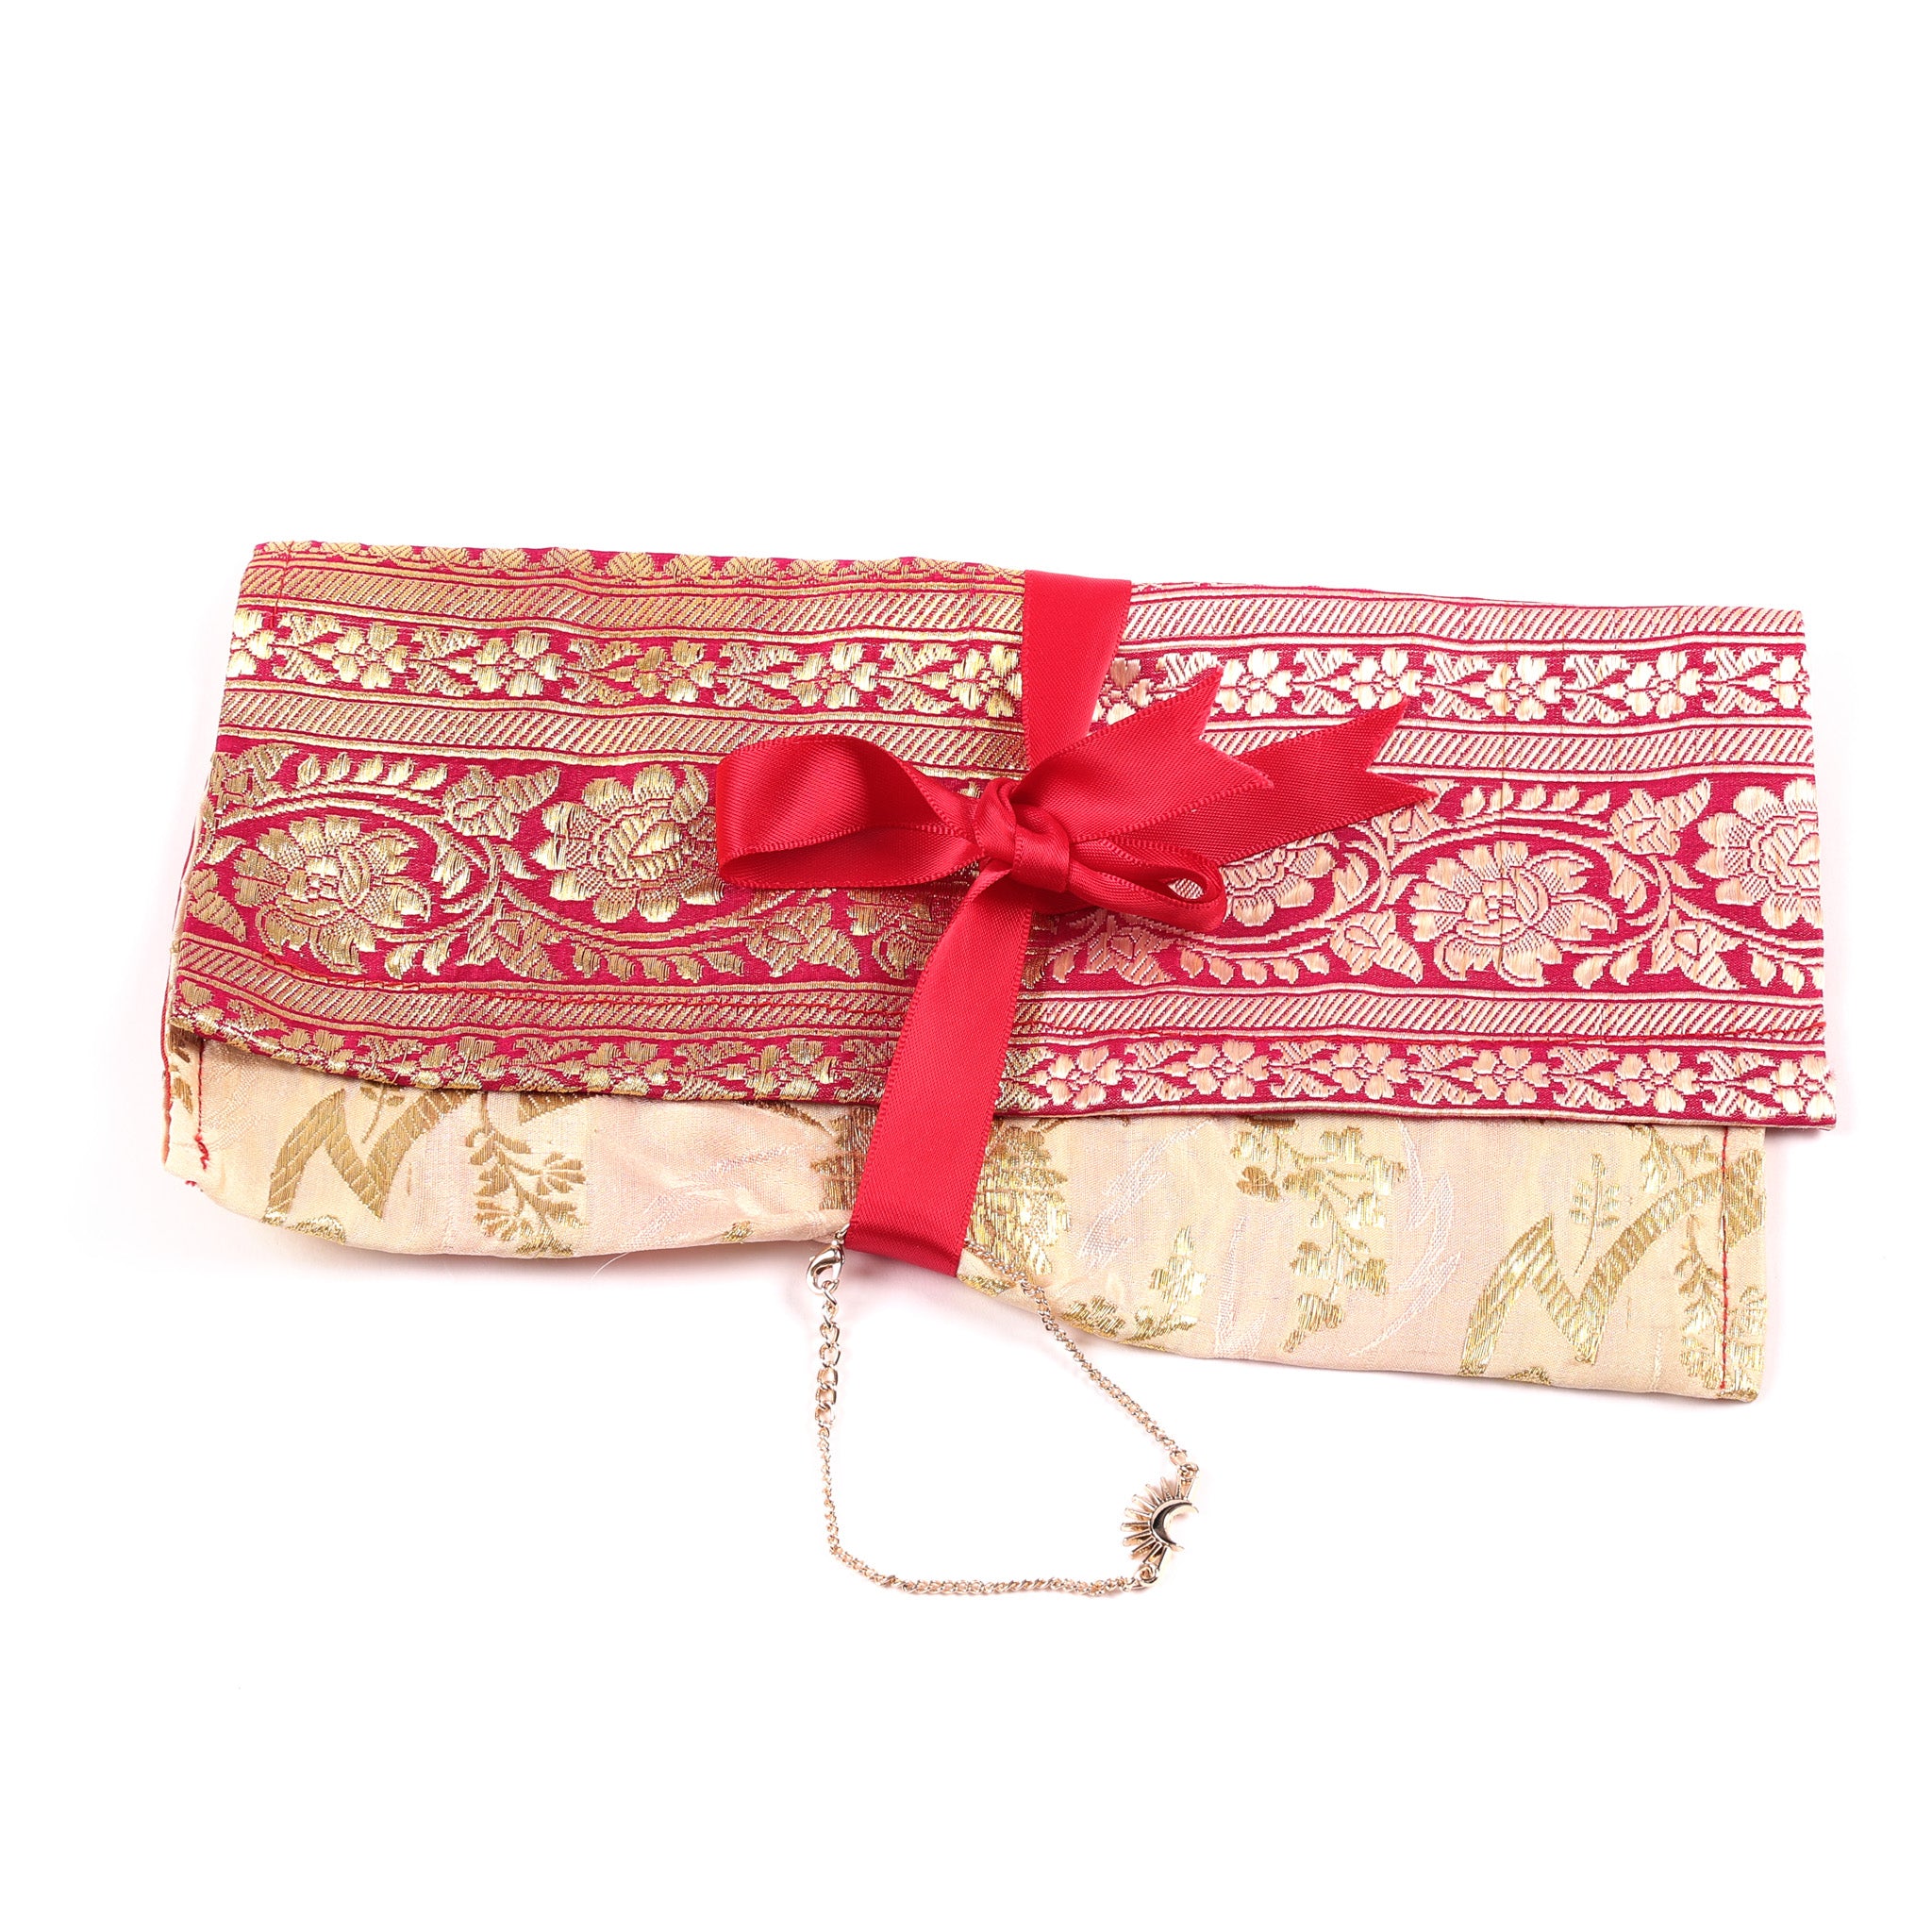 celestial gold purse made from vintage silk sari